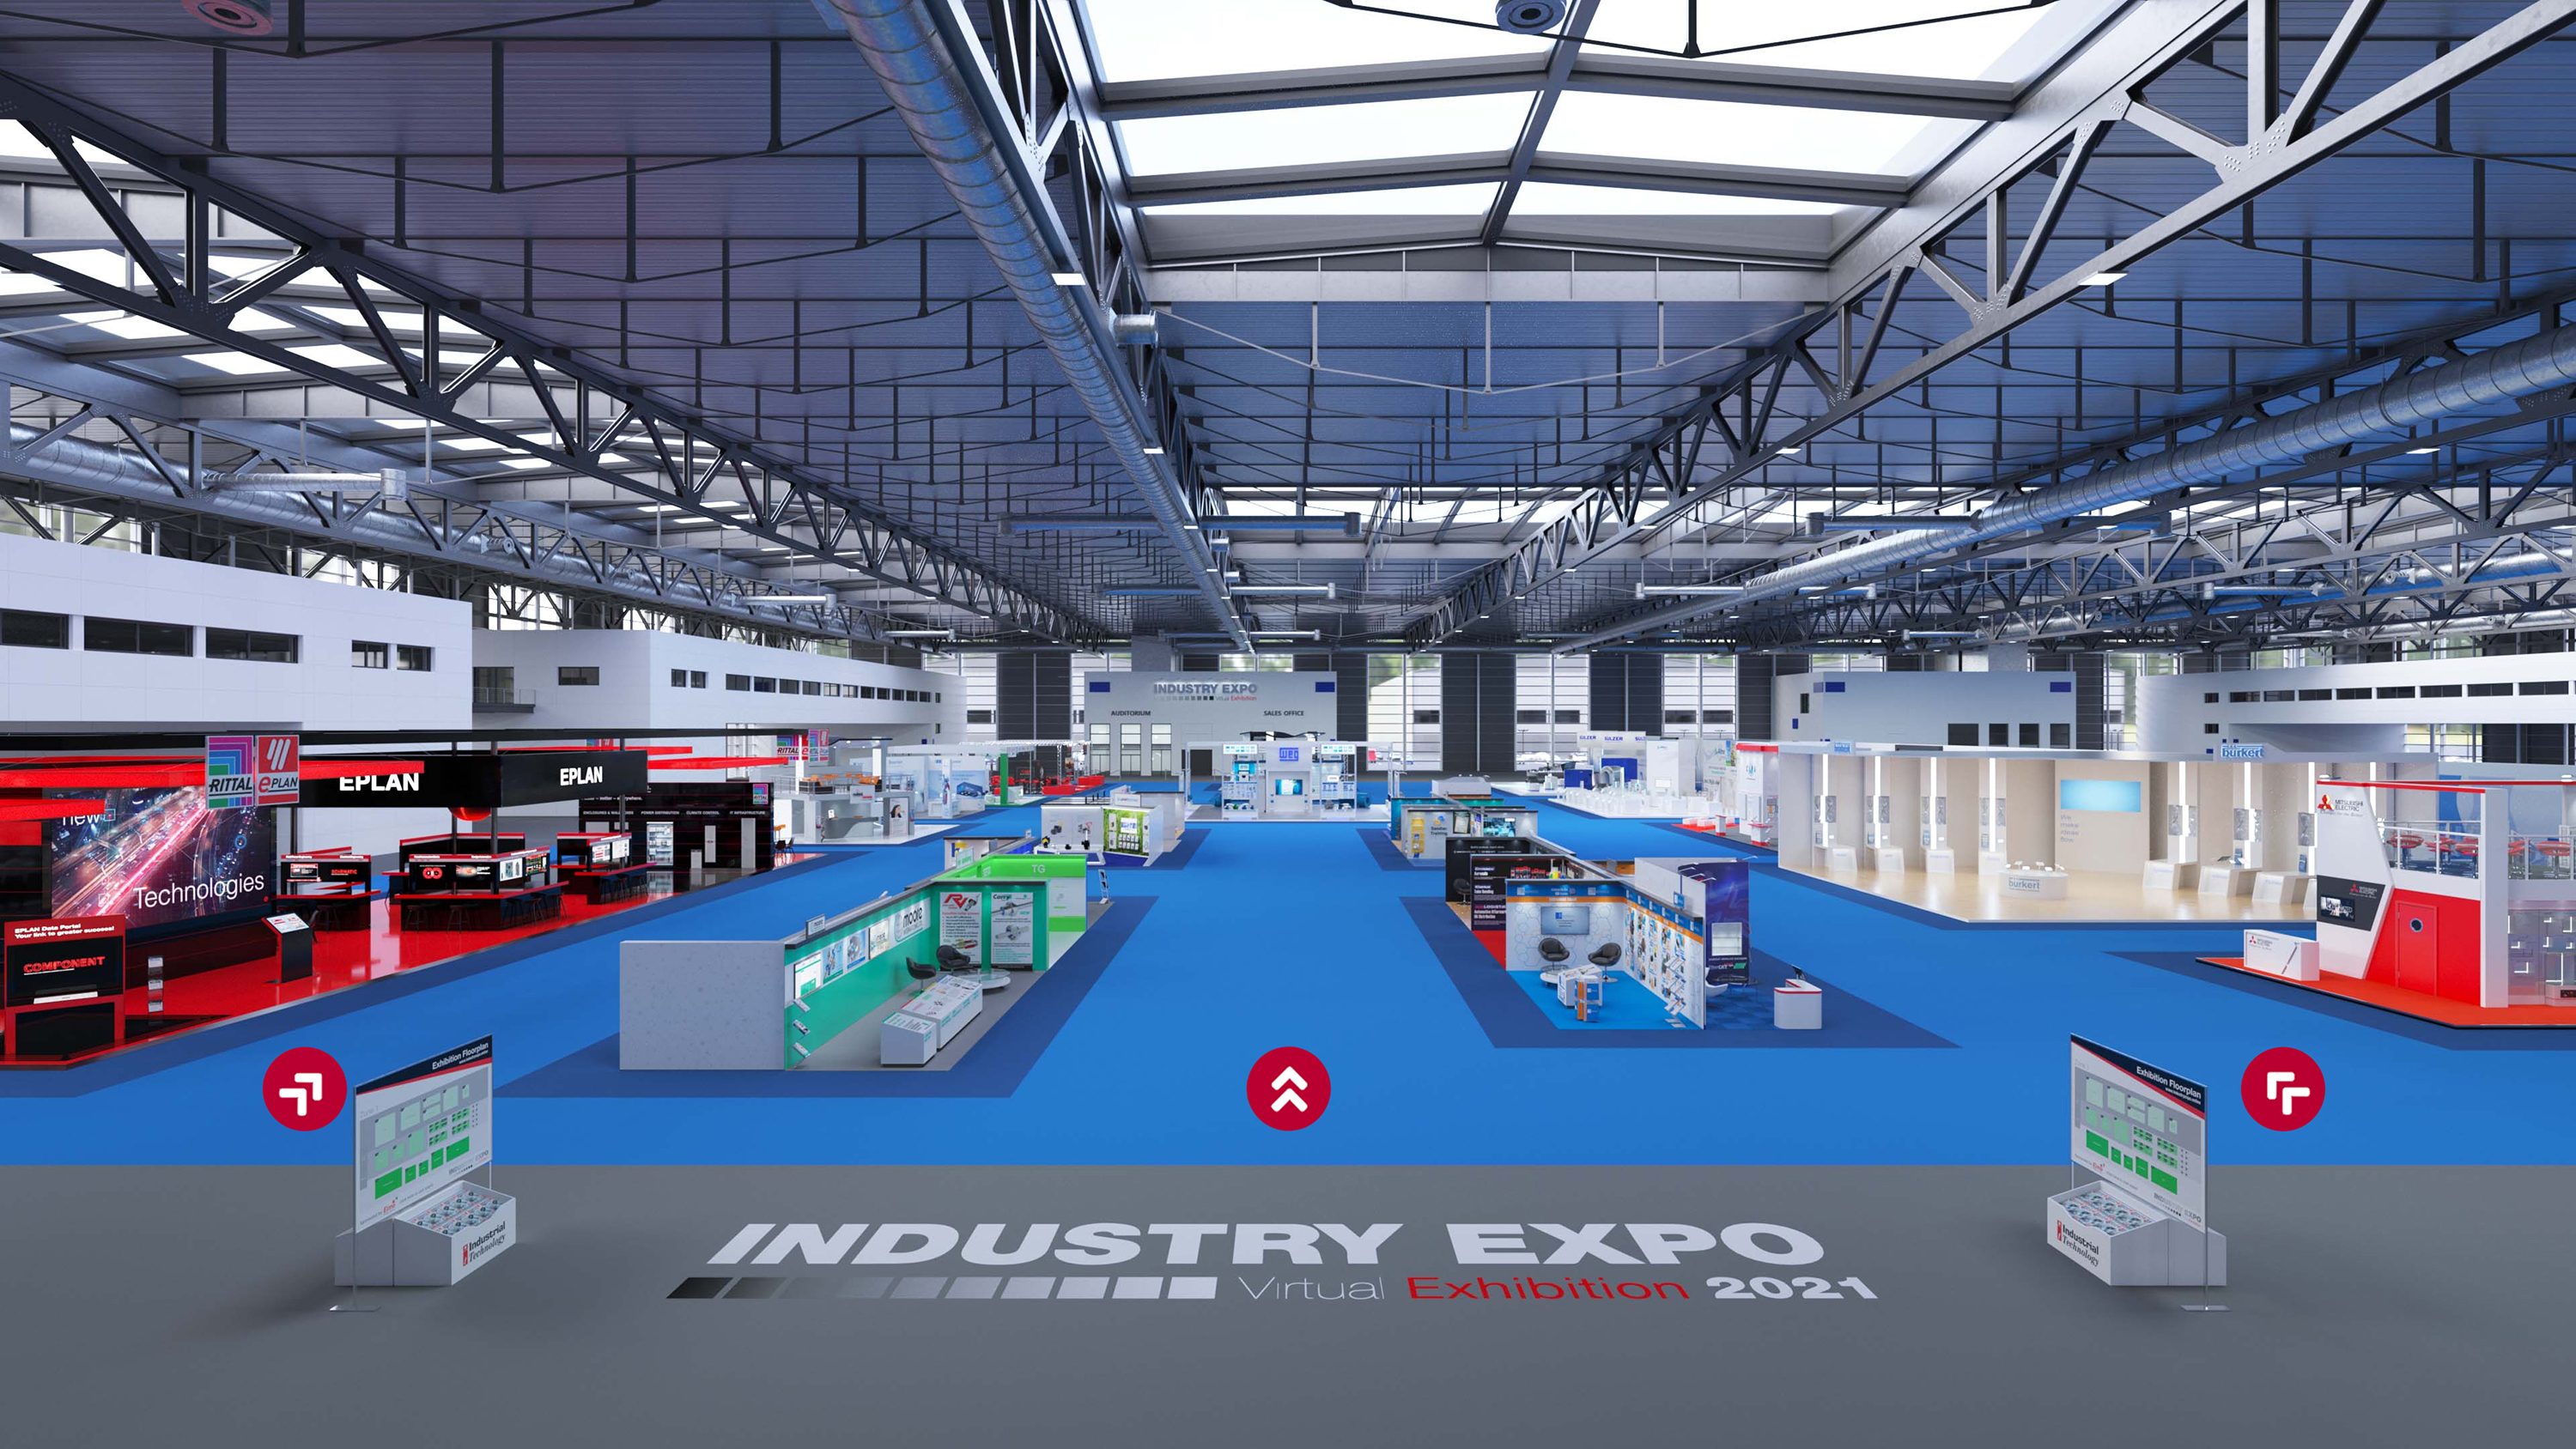 The world’s largest 3D virtual trade show IndustryExpo has launched an even bigger and better show for its third year in 2021.